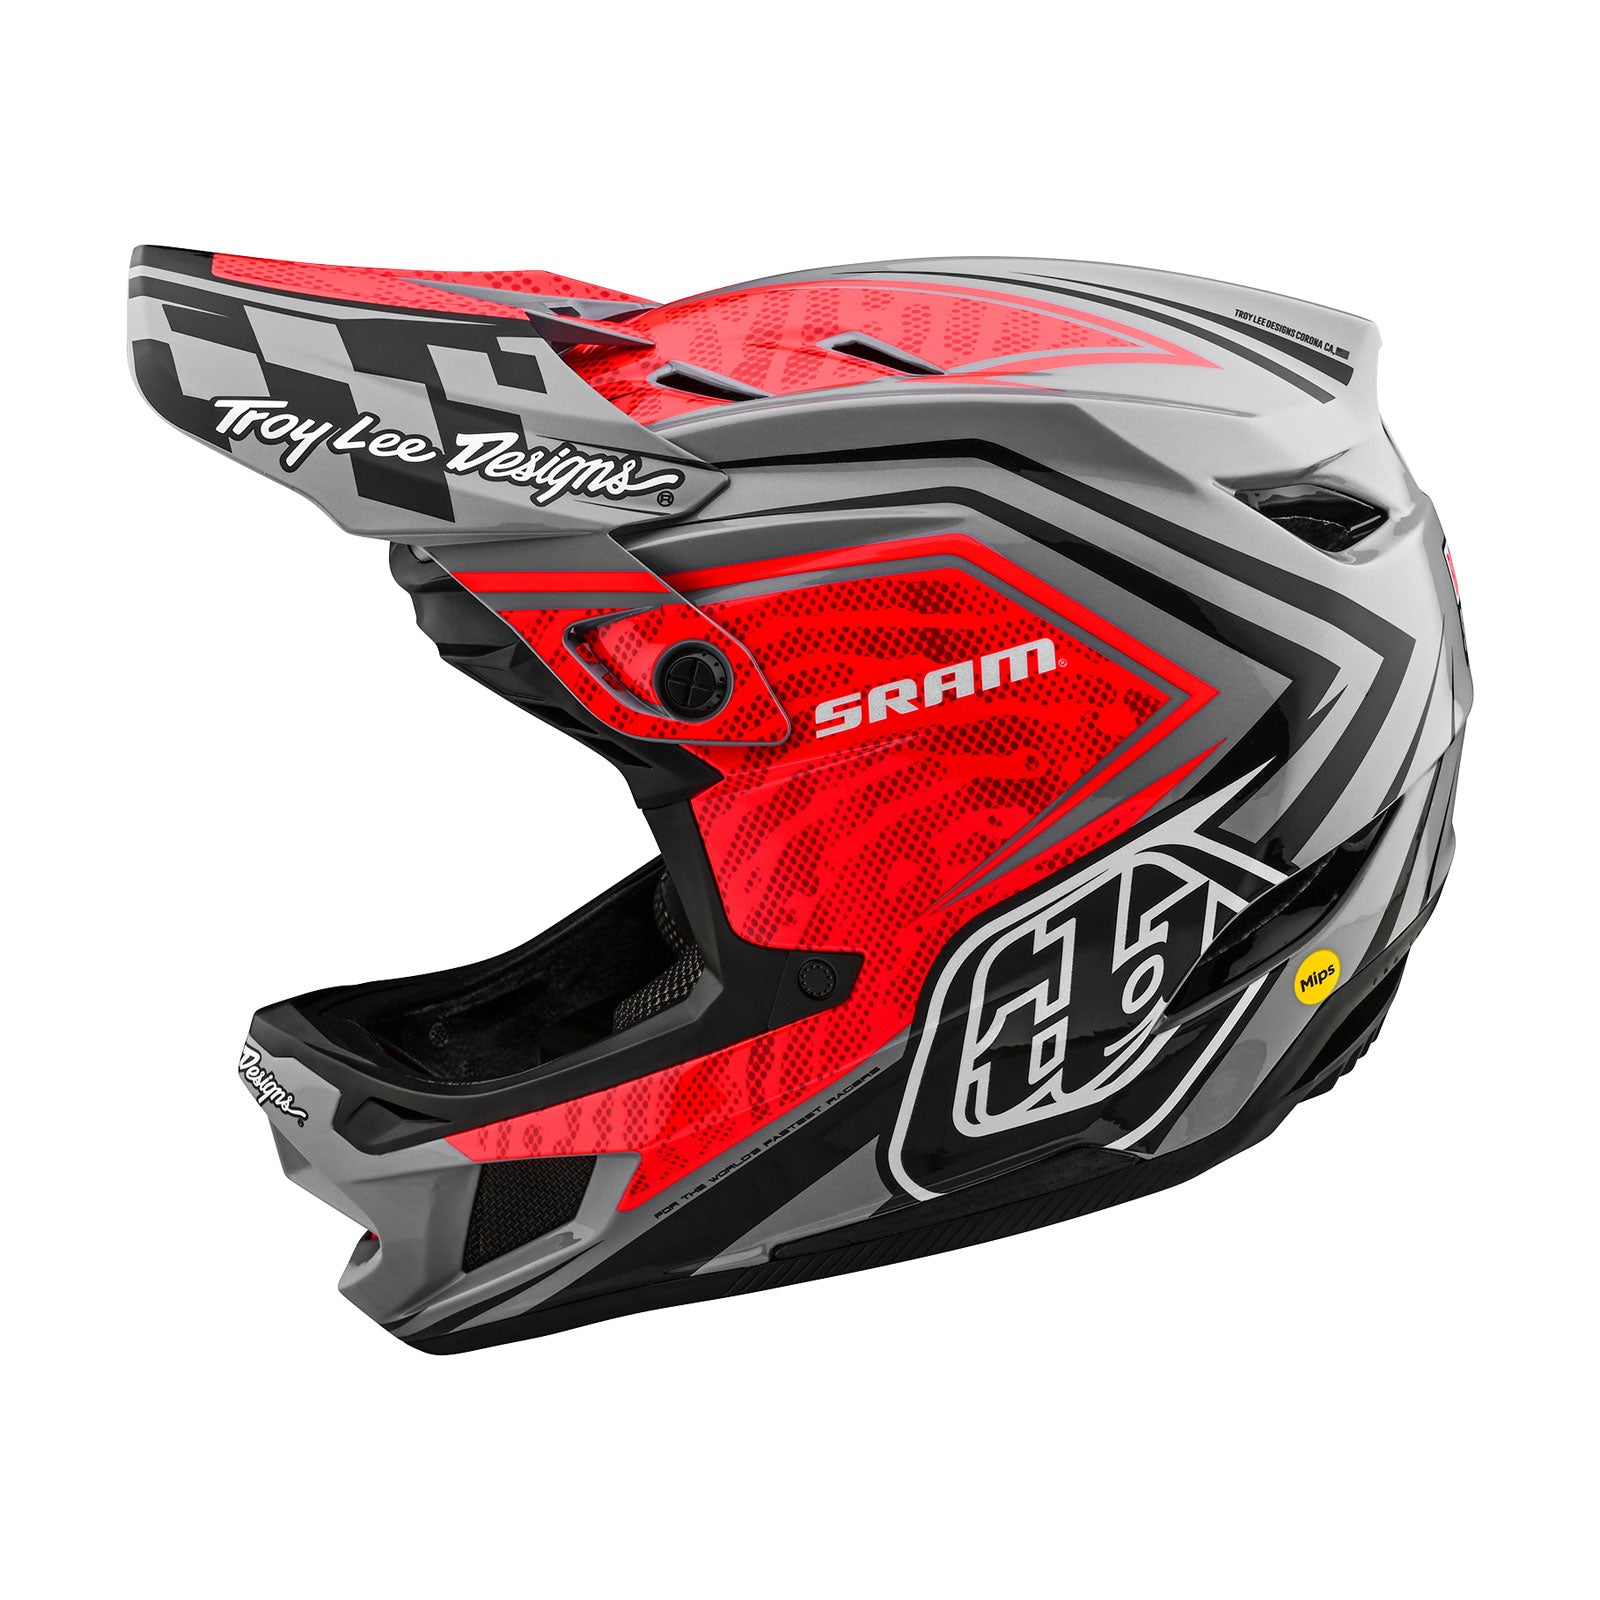 Troy Lee Designs D4 Carbon Full Face Helmet with MIPS - Reverb